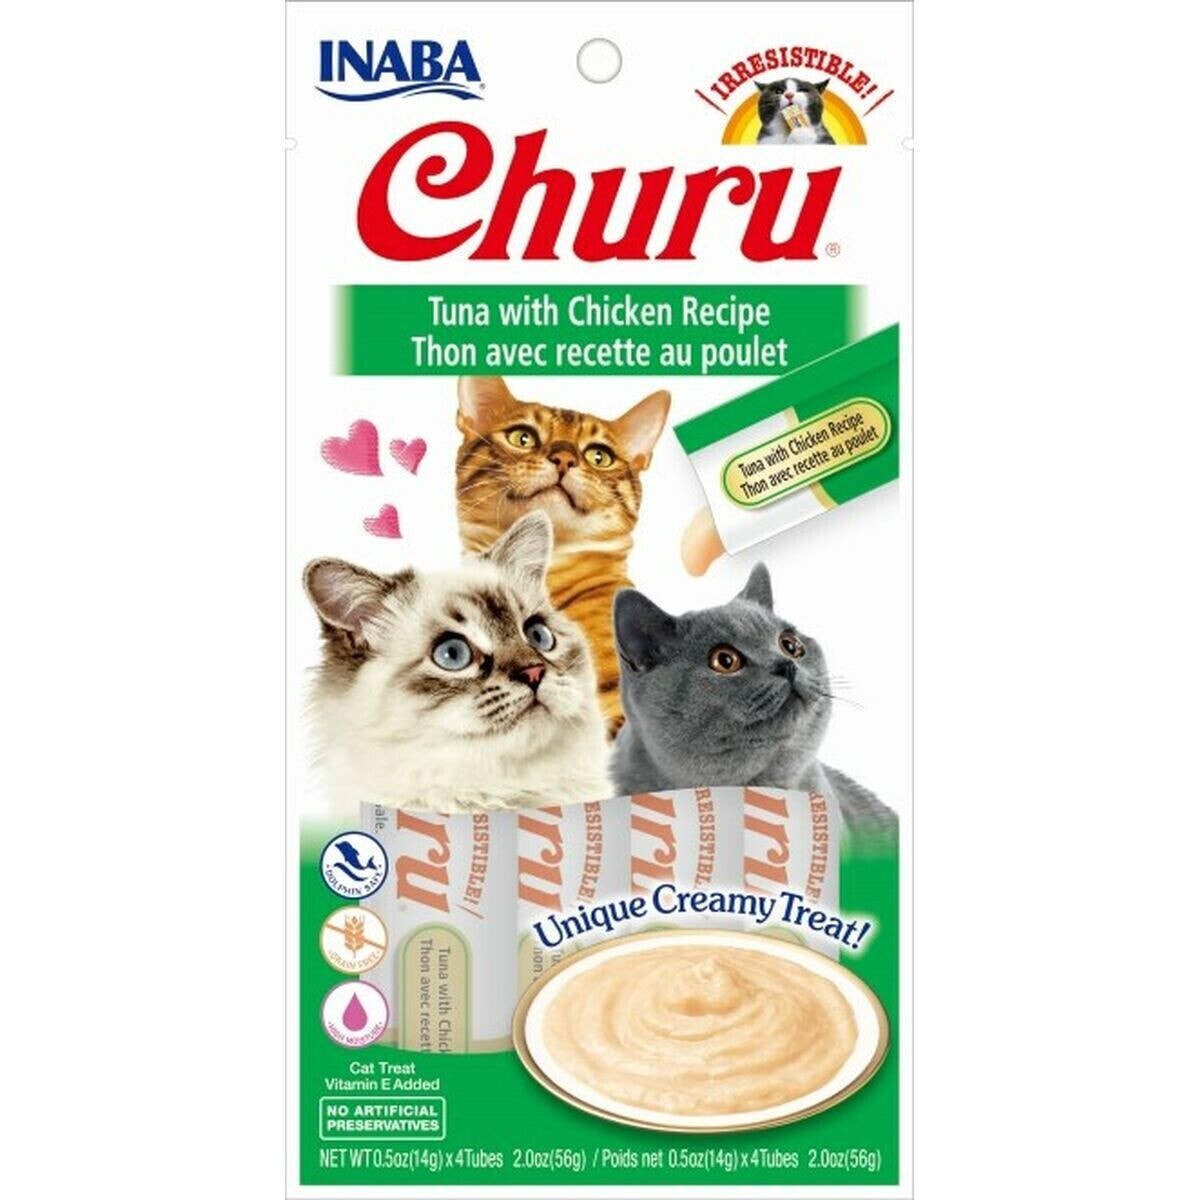 Snack for Cats Inaba EU102 4 x 14 g Sweets Chicken Tuna